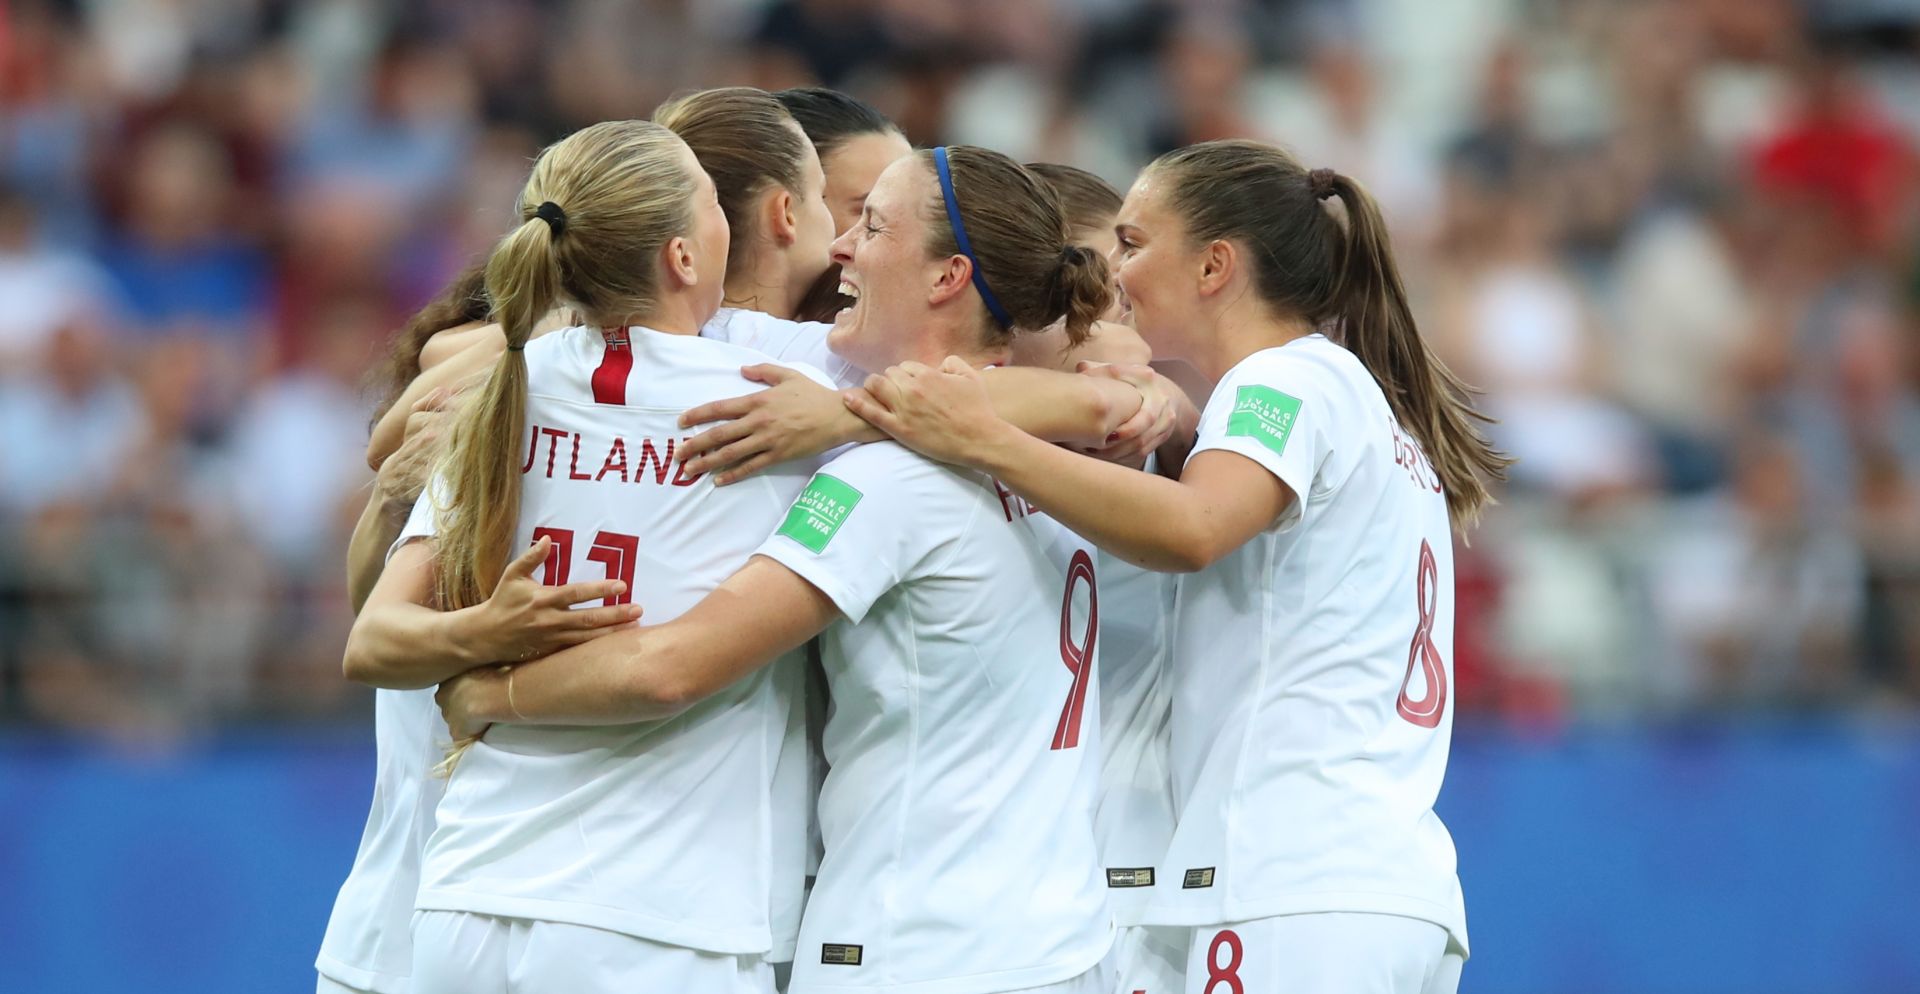 epa07654517 Norway's players celebrate during the FIFA Women's World Cup 2019 Group A soccer match between South Korea and Norway in Reims, France, 17 June 2019.  EPA/TOLGA BOZOGLU